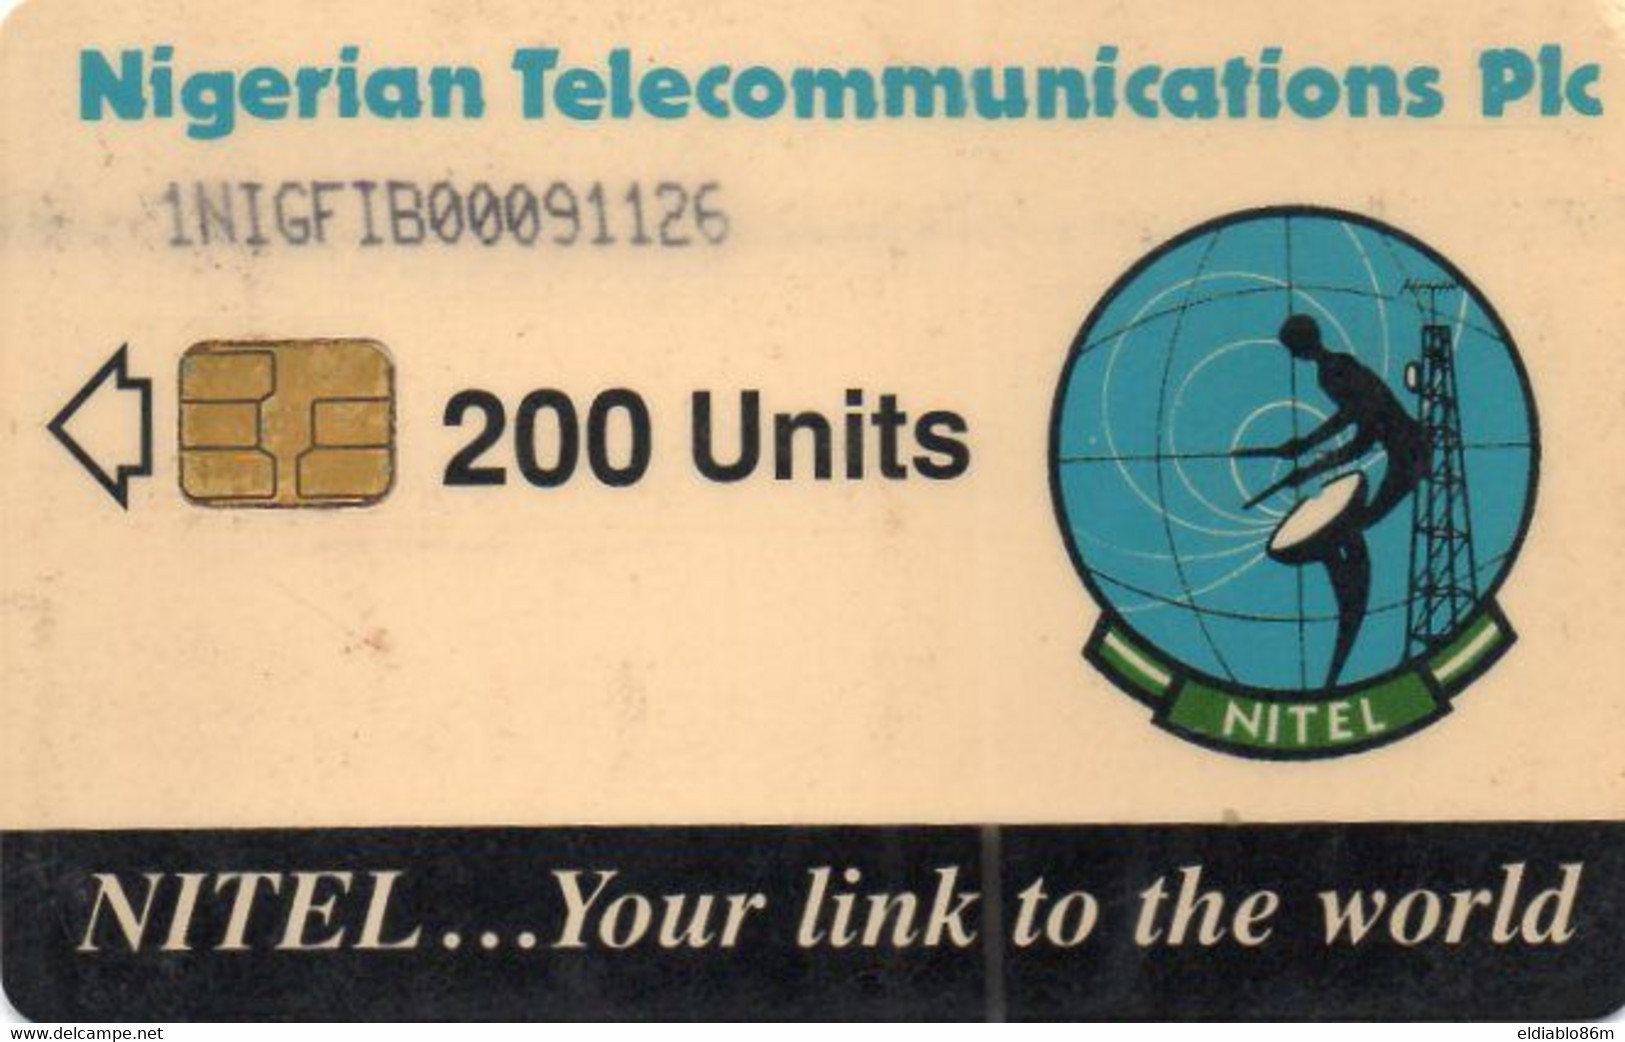 NIGERIA - CHIP CARD - EARTH STATION 200 UNITS - 1NIGFIB (NOT PERFECT - CORNER RIGHT BIT BENDED) - Nigeria